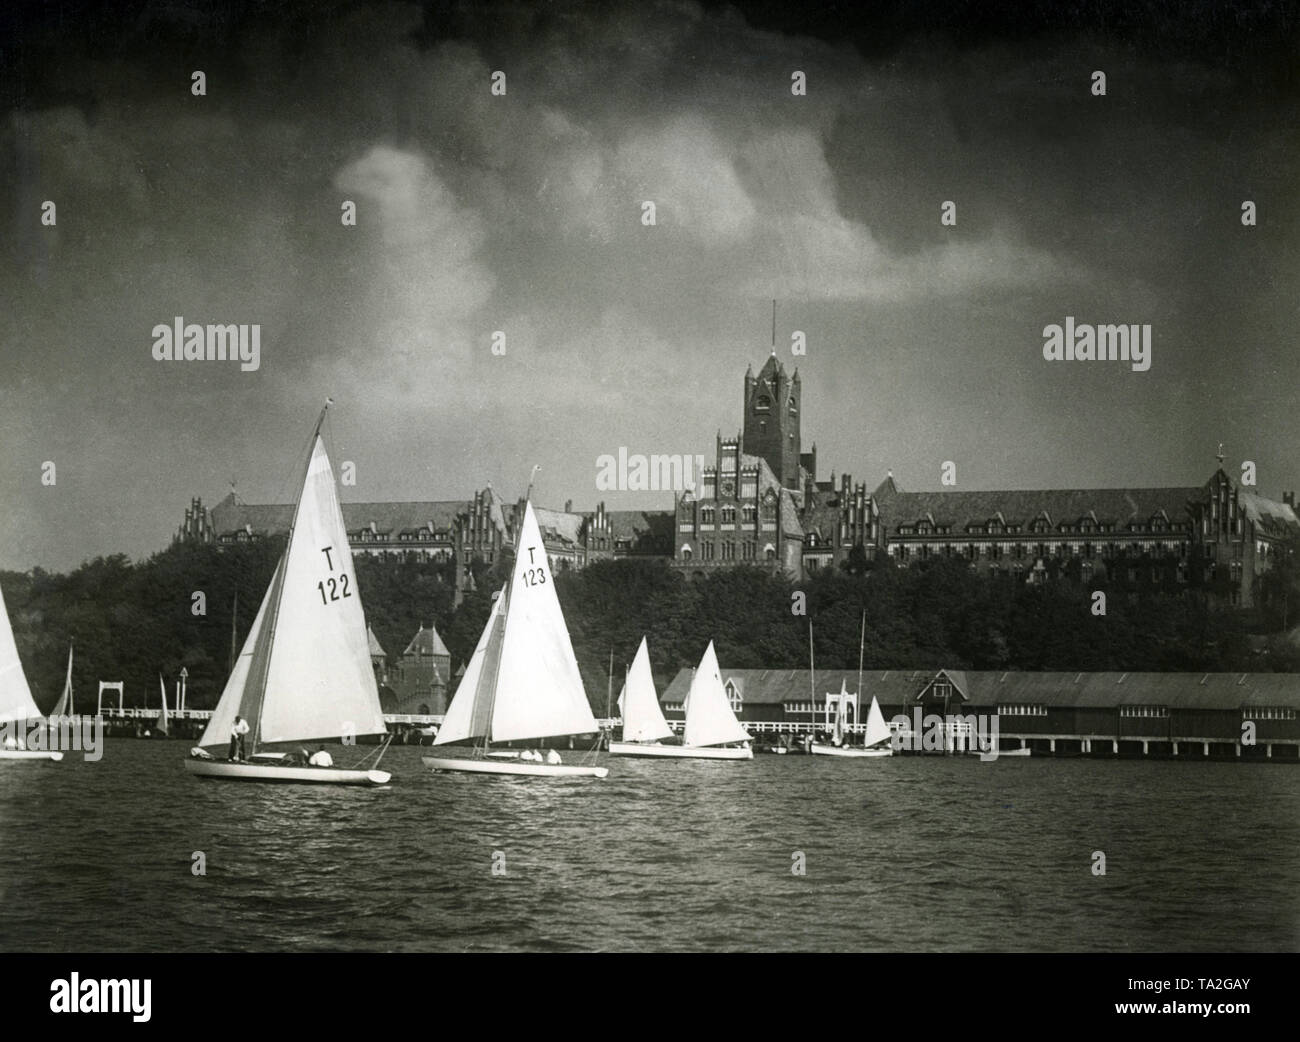 The Naval Academy in Muerwik in Flensburg, in the foreground are some sailboats training on the water. It is a picture from the Nazi propaganda film 'Comrades at Sea' from 1938. Stock Photo